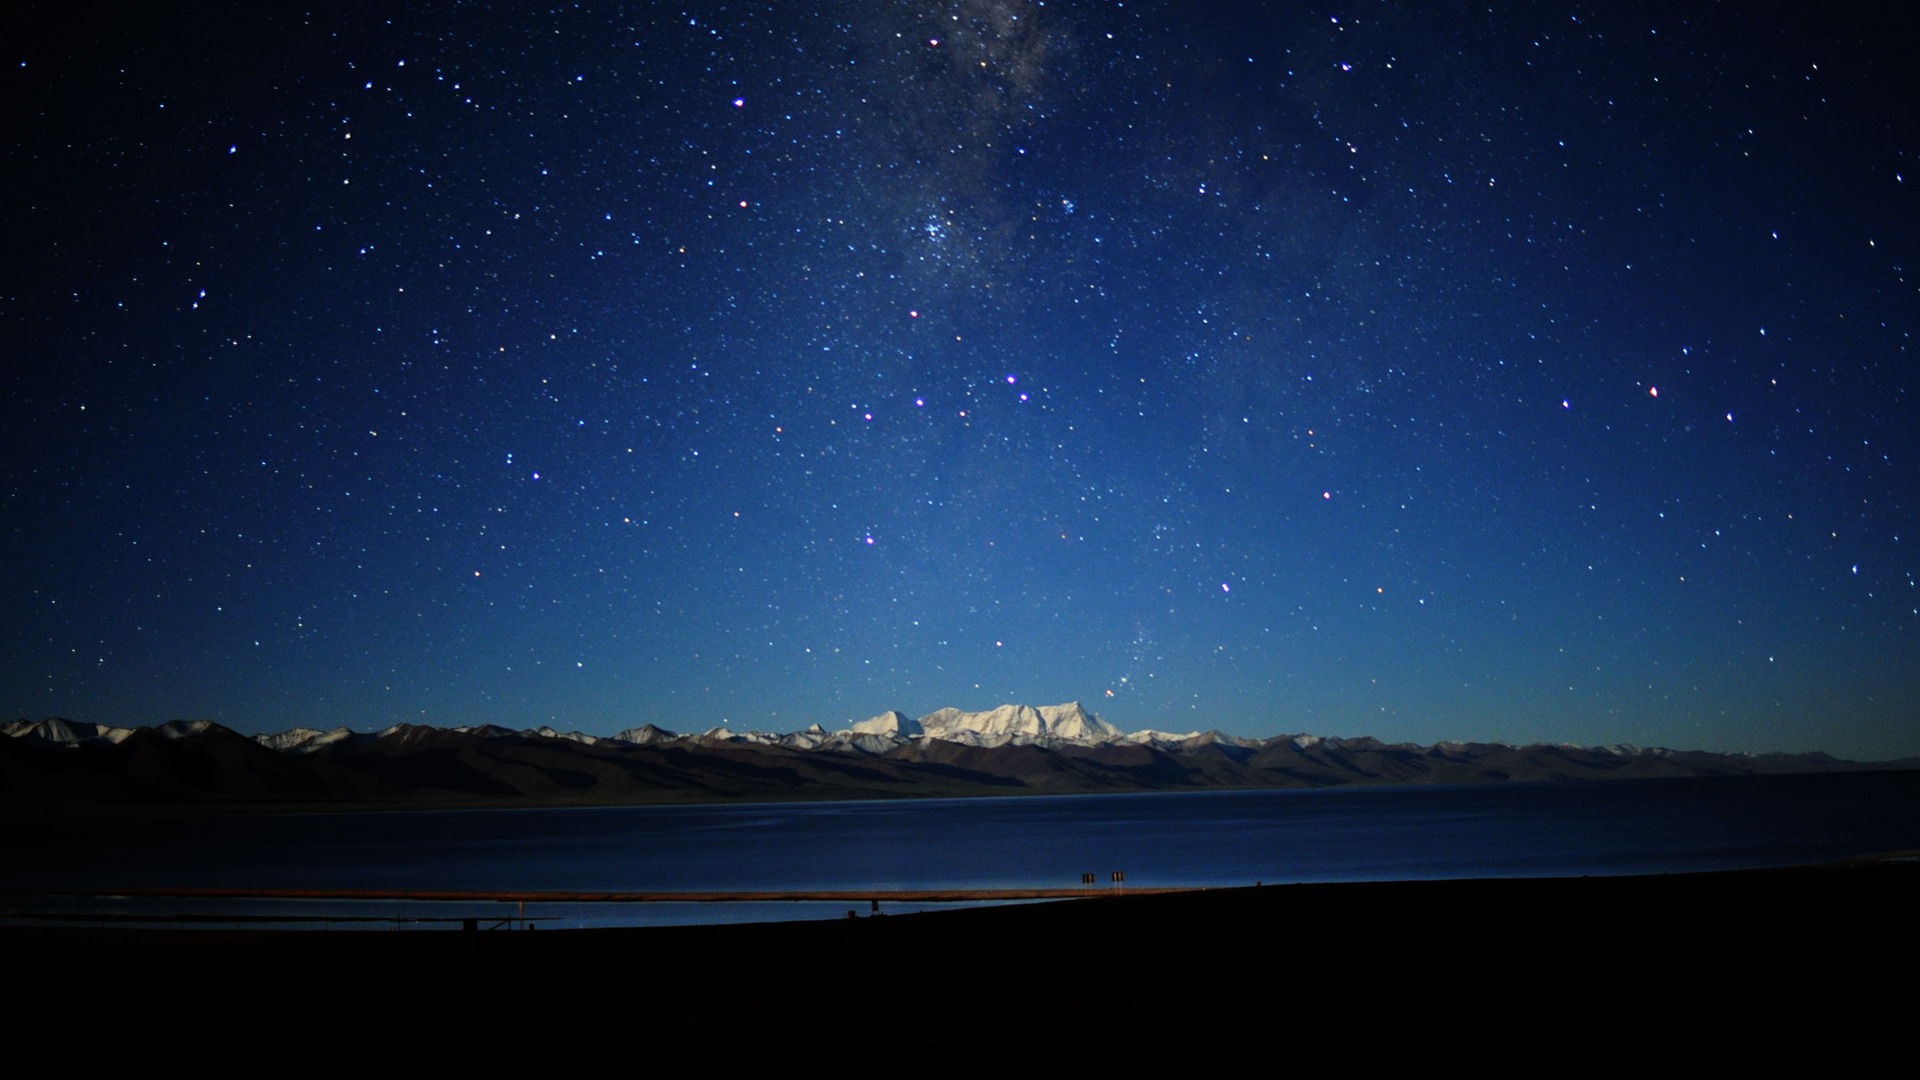 Free Download The Night Sky In Tibet Natural Scenery Wallpaper Full Hd Desktop 19x1080 For Your Desktop Mobile Tablet Explore 48 Night Sky Desktop Wallpaper Night Sky Wallpapers Starry